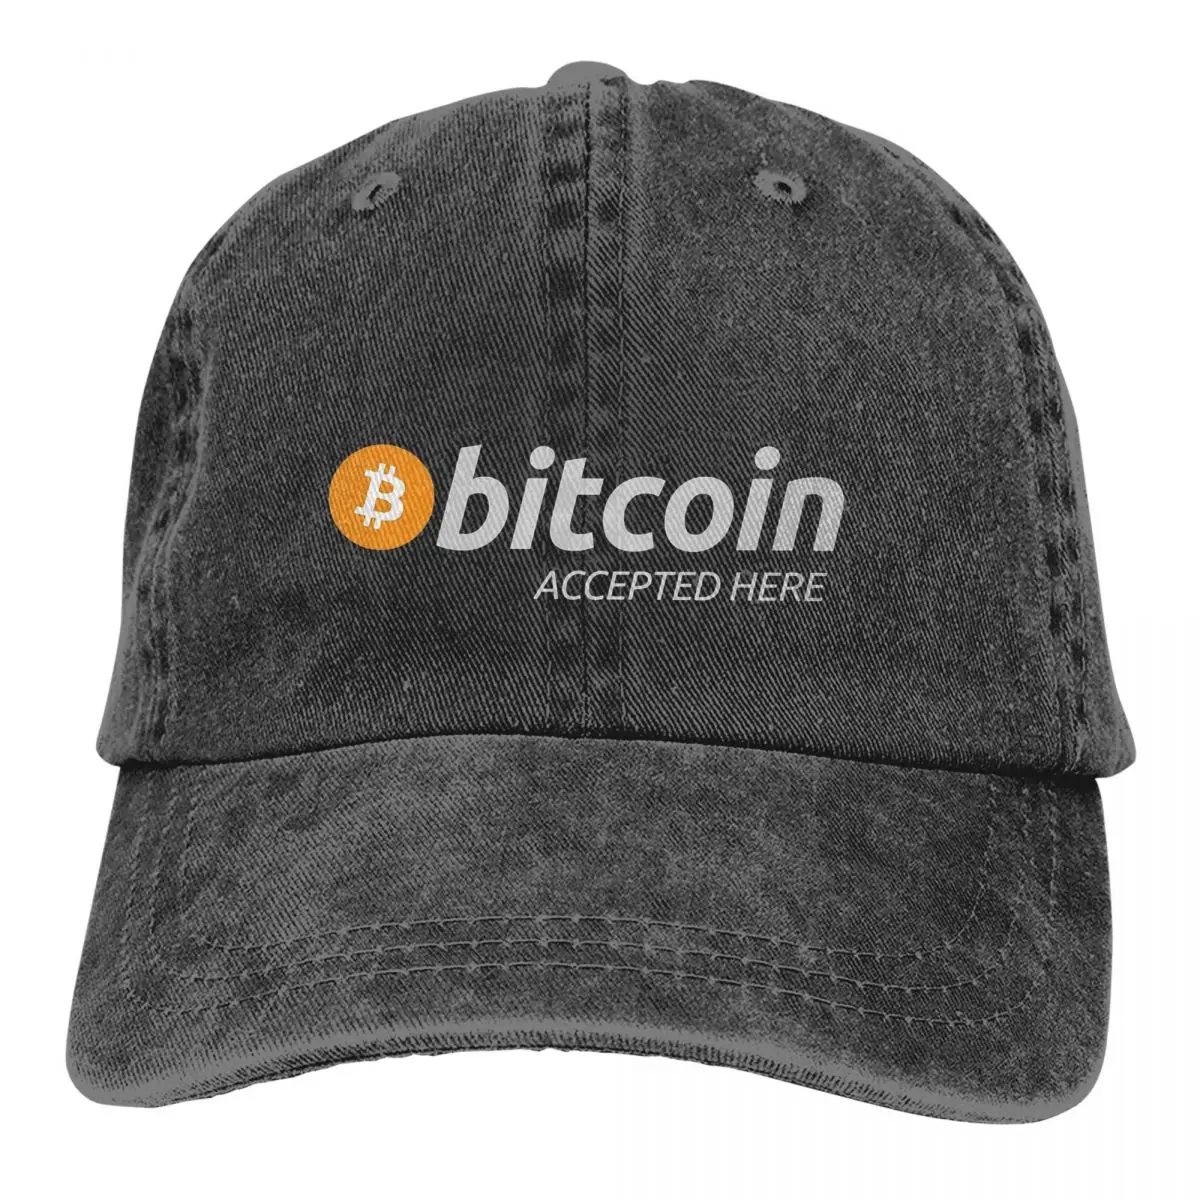 

Accepted Here BTC Baseball Caps Peaked Cap Bitcoin Cryptocurrency Miners Meme Sun Shade Hats for Men Women